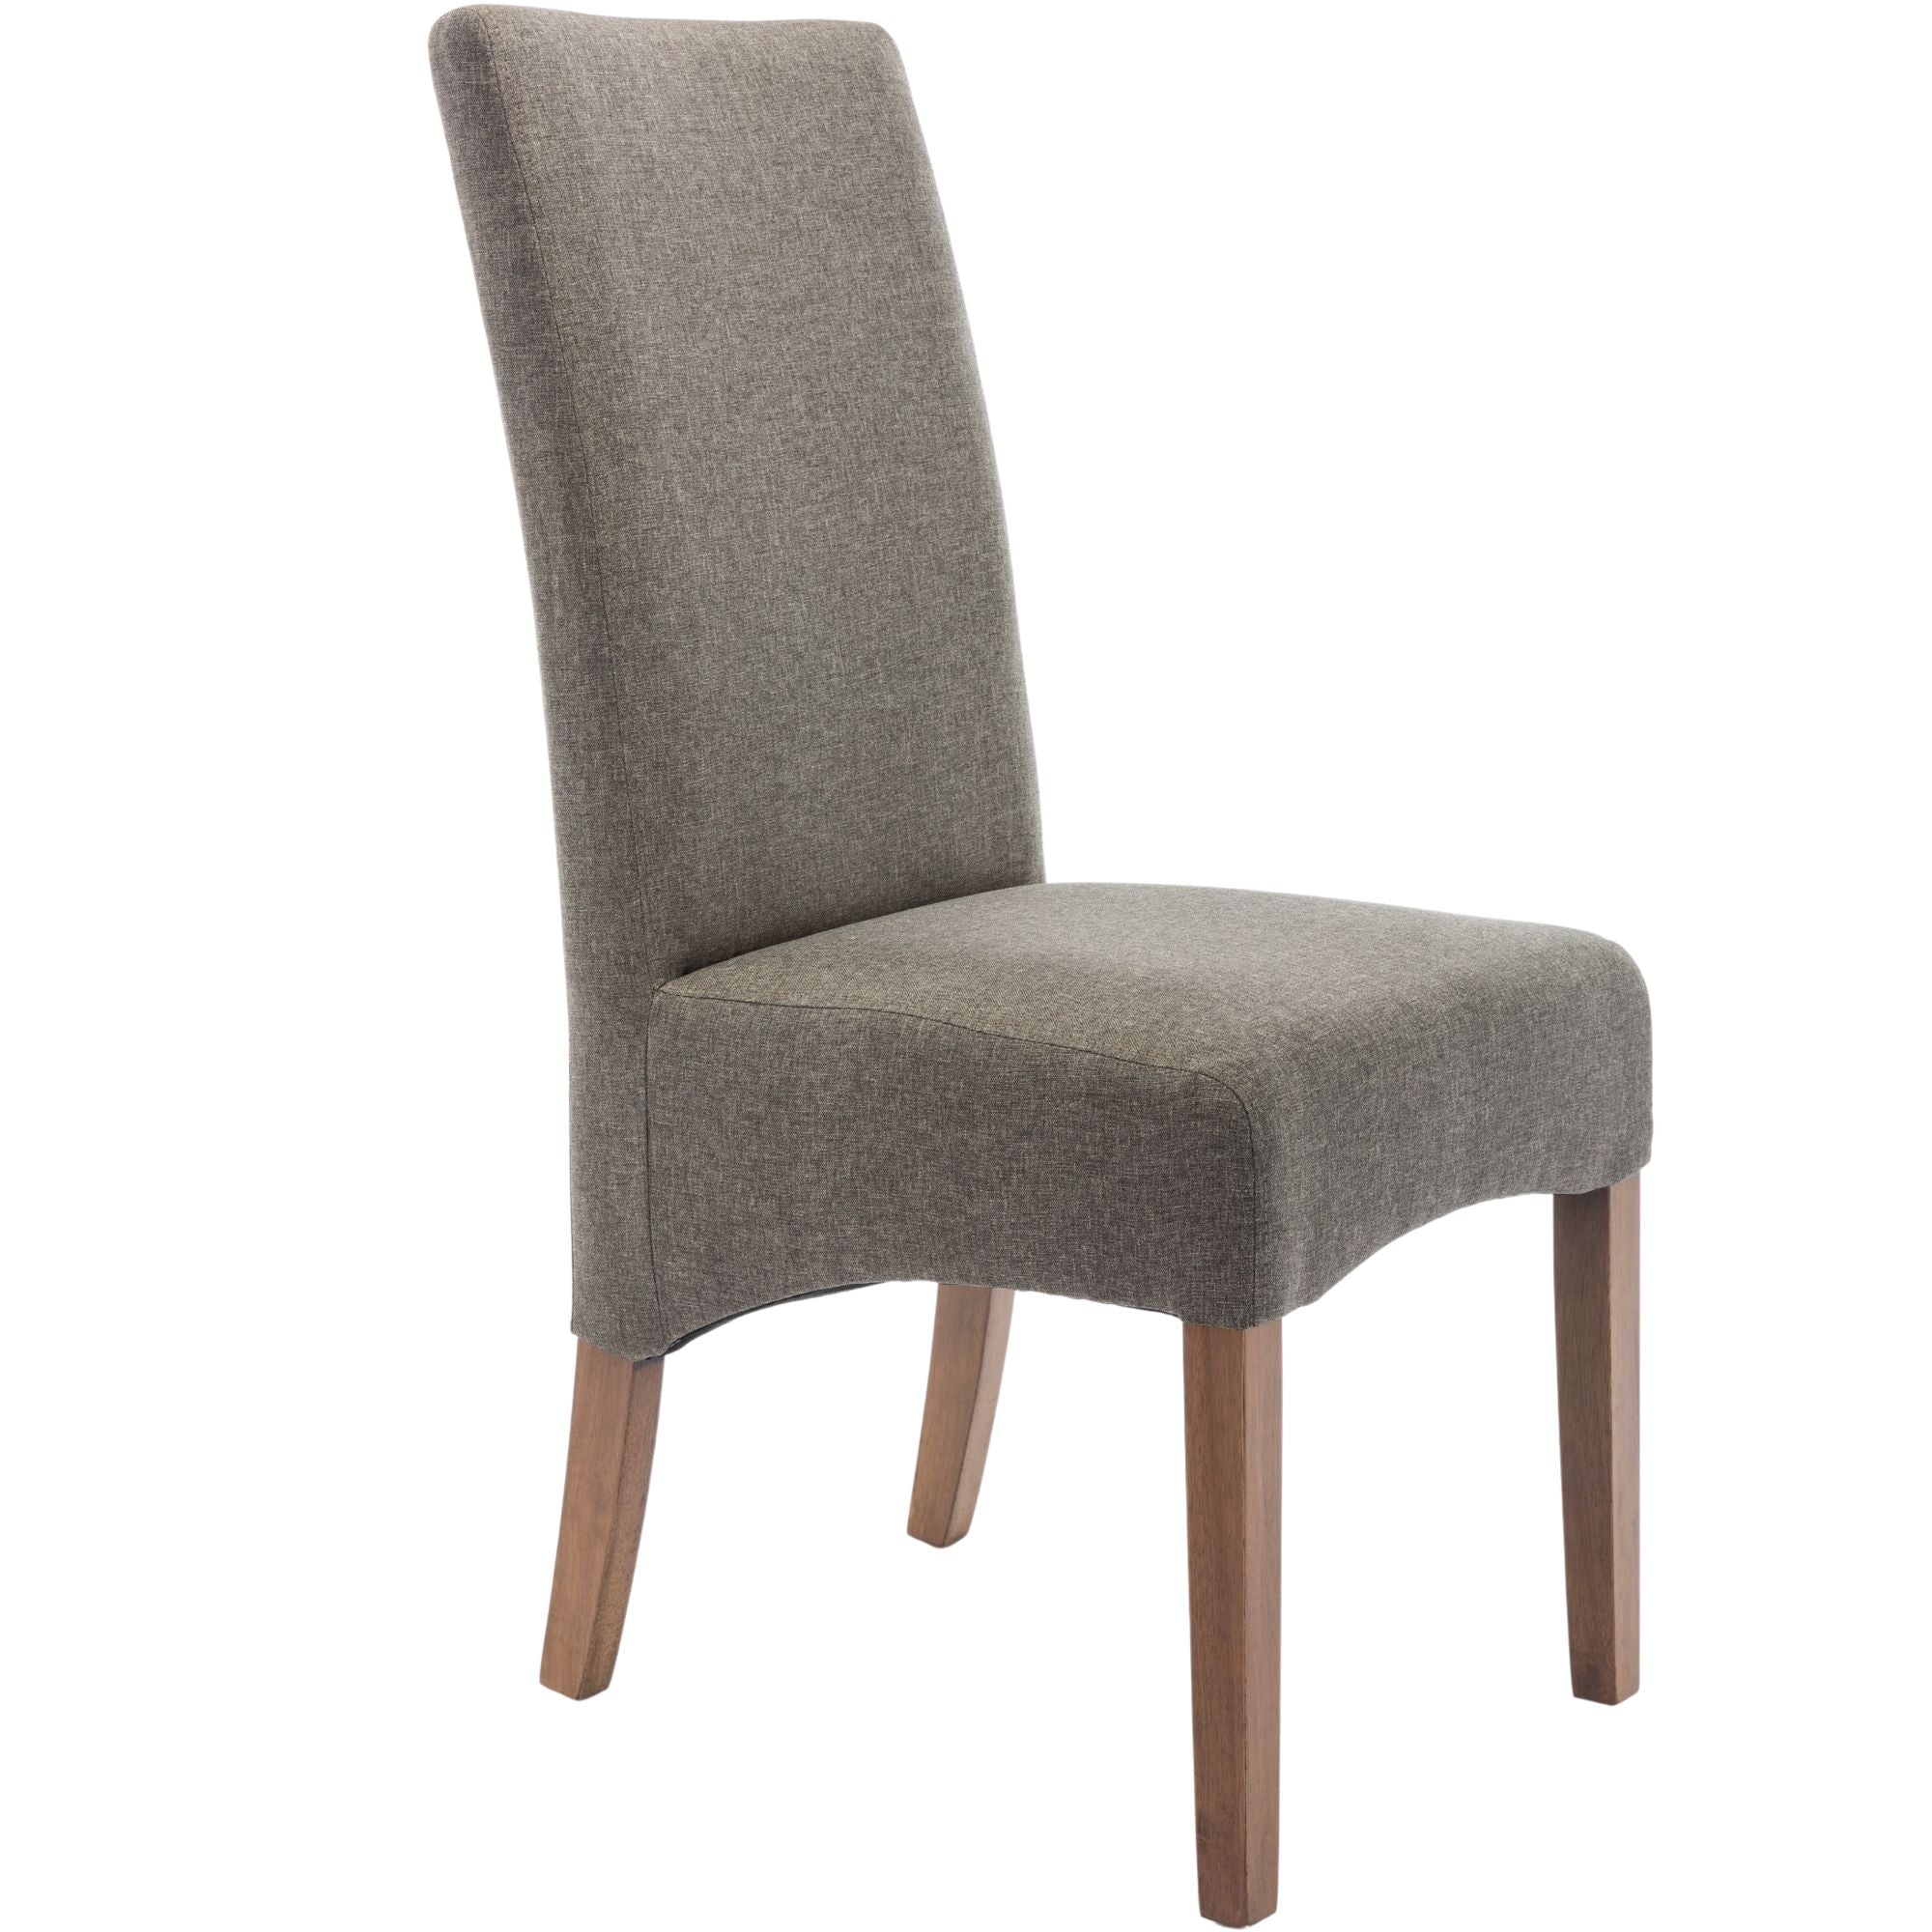 Aksa Fabric Upholstered Dining Chair Set of 6 Solid Pine Wood Furniture - Grey Deals499